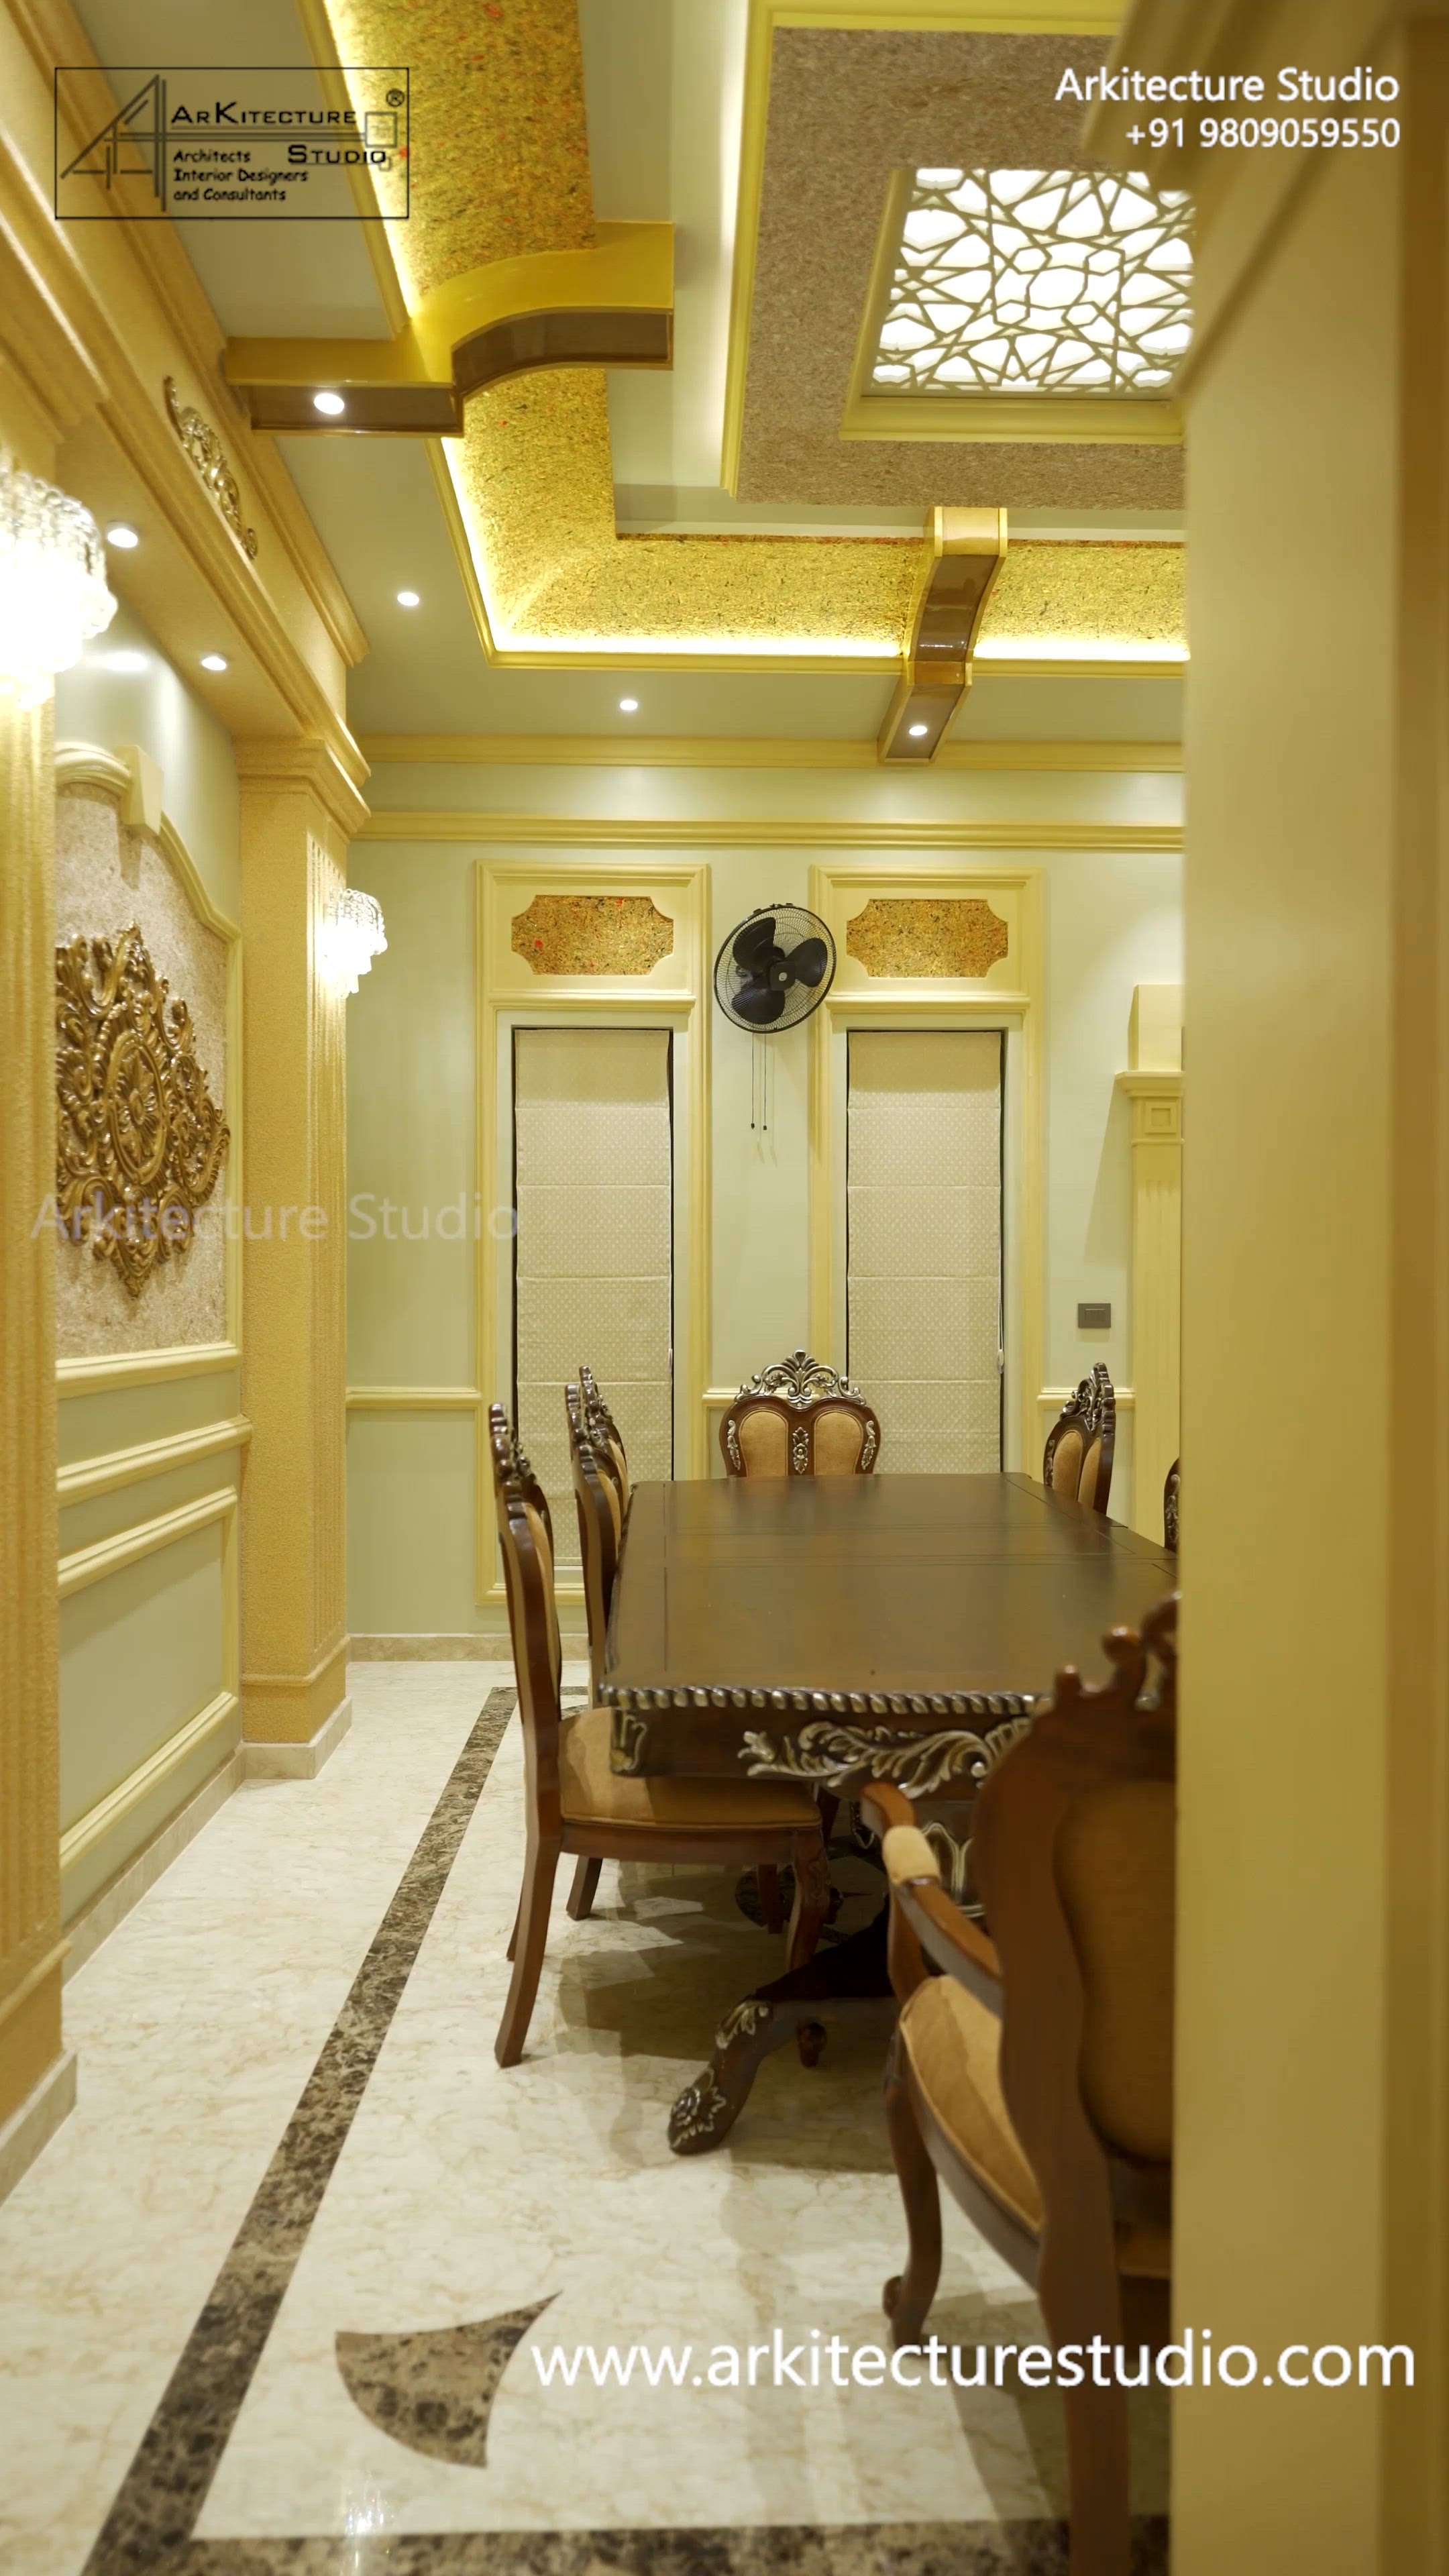 Luxury Dining room interior
colonial house
classic homes
www.arkitecturestudio.com
 #dininginterior 
 #classichomes 
 #luxuryhouse
 #kerala
 #bestarchitect
#arkitecturestudio

www.arkitecturestudio.com